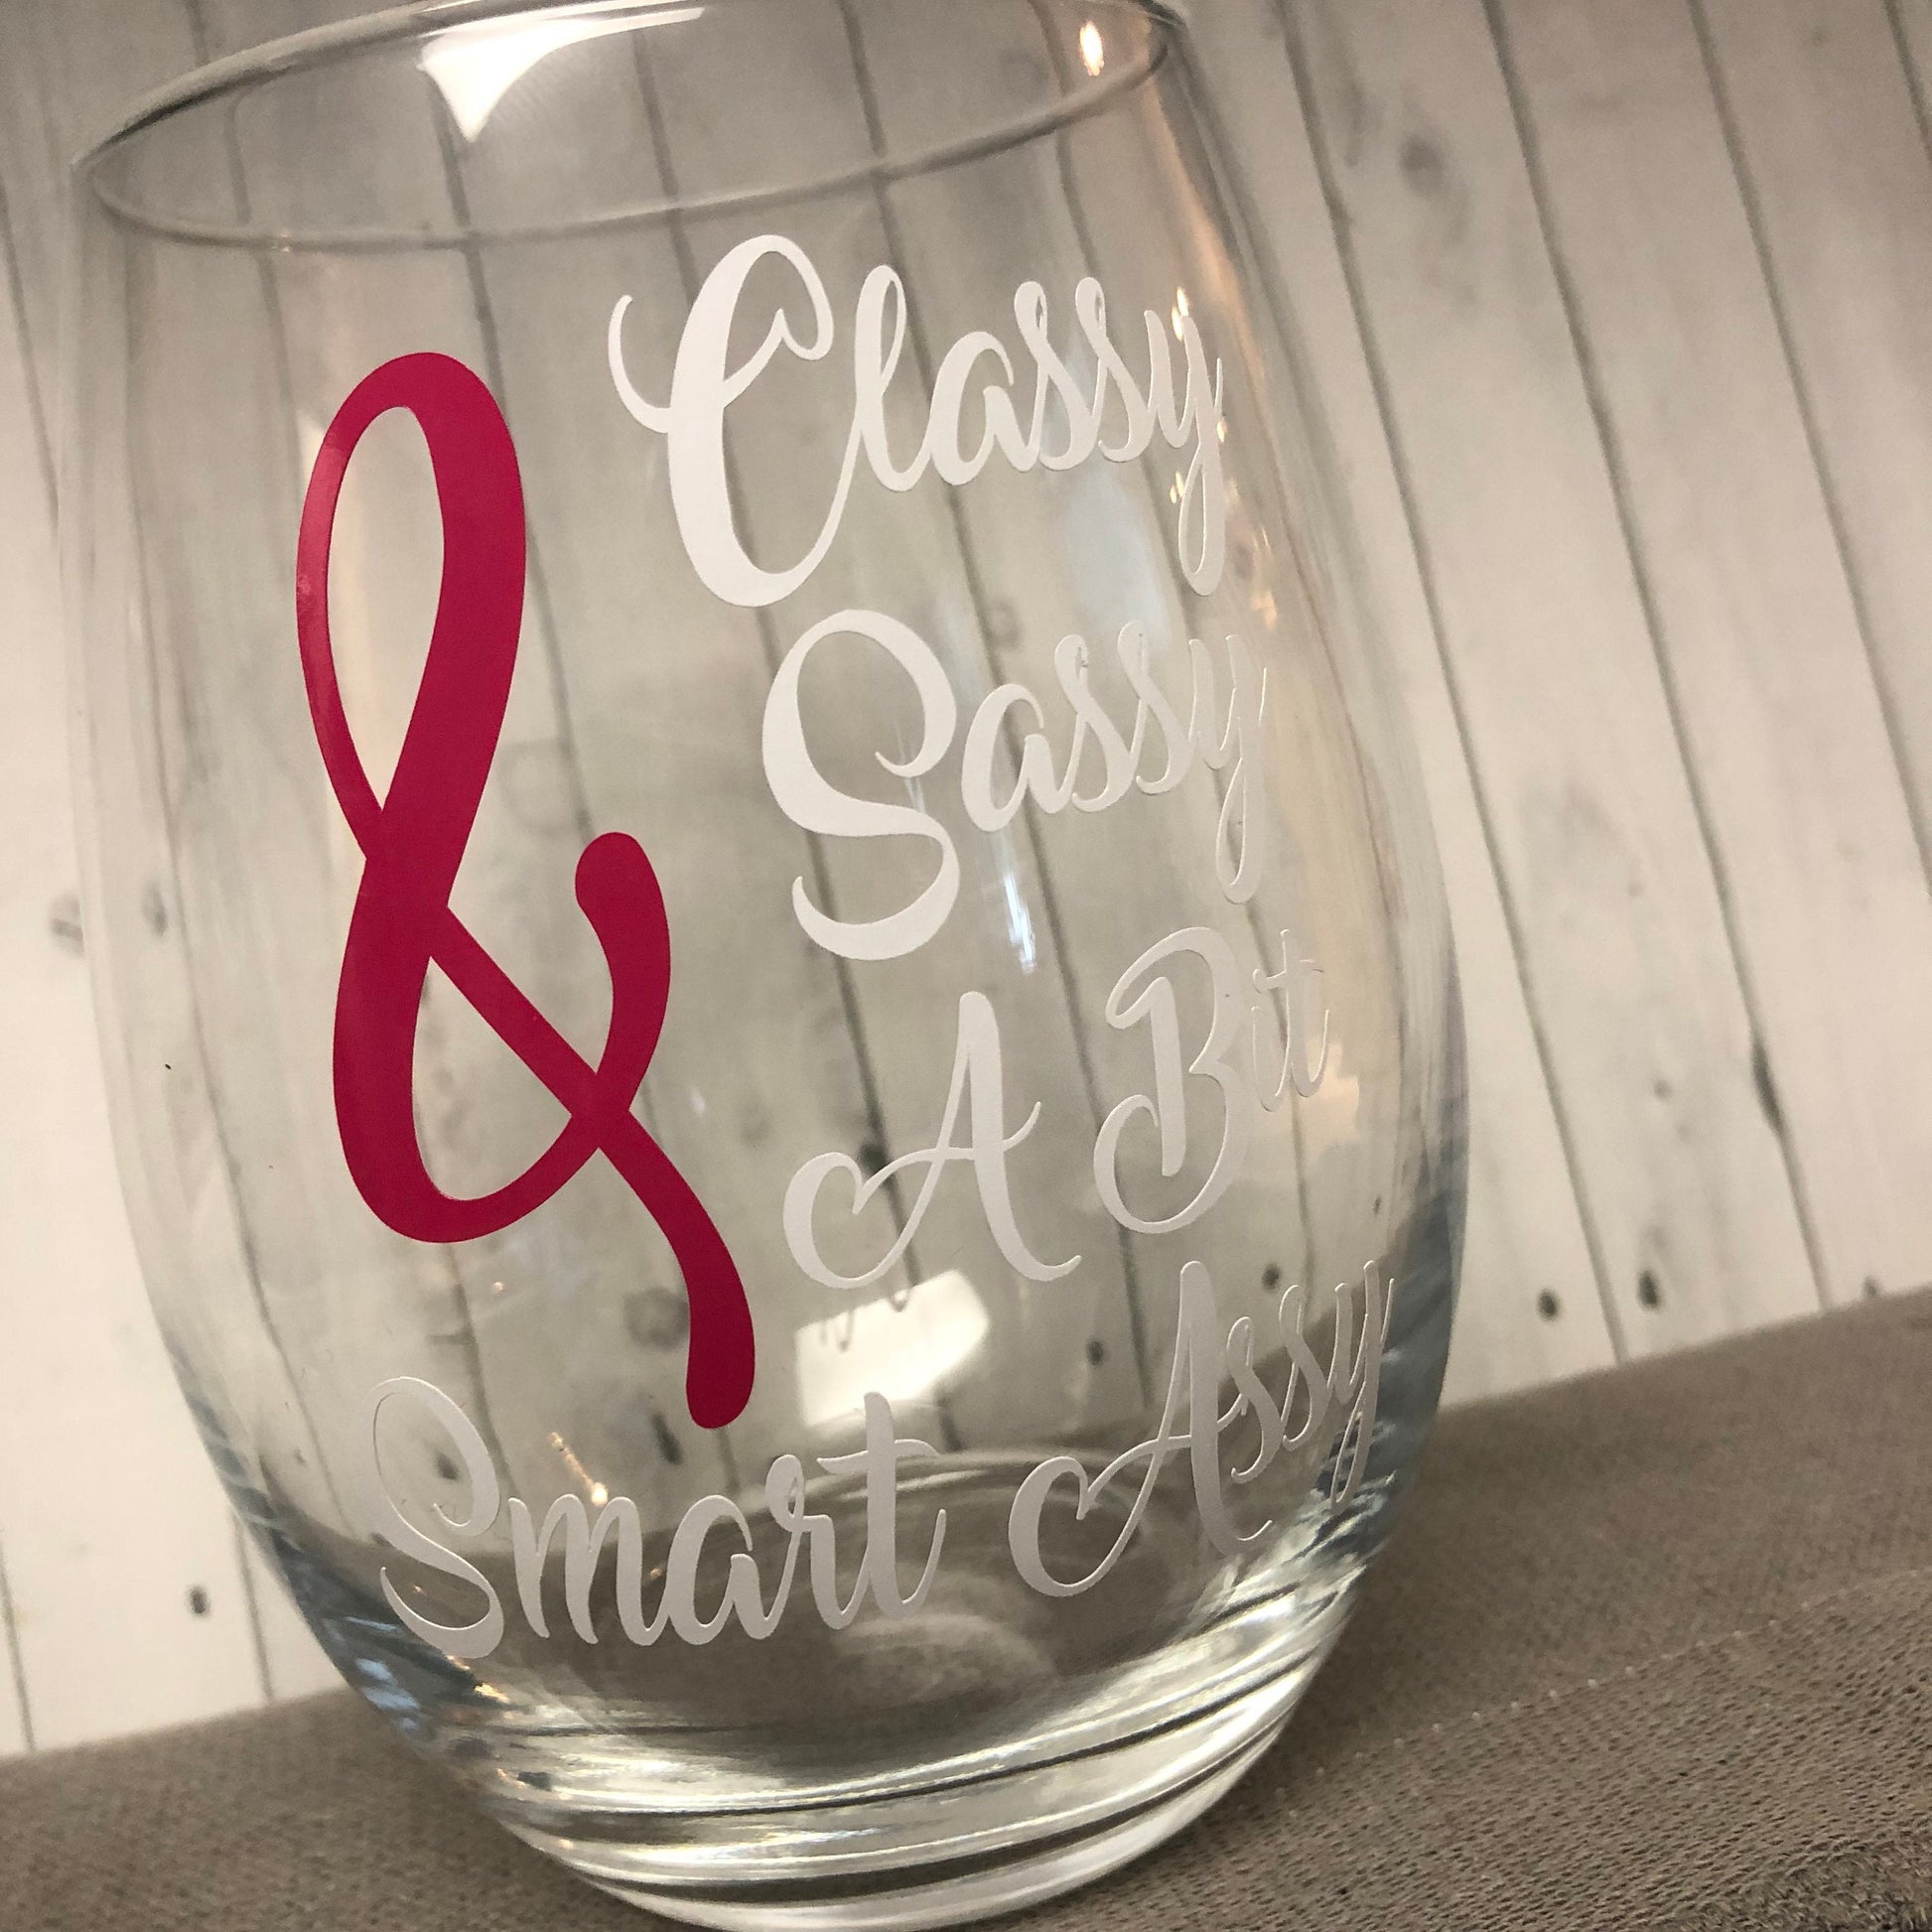 Classy Sassy & a bit smart assy glass, birthday gifts for her, gifts f –  K.C.'s Creations Station